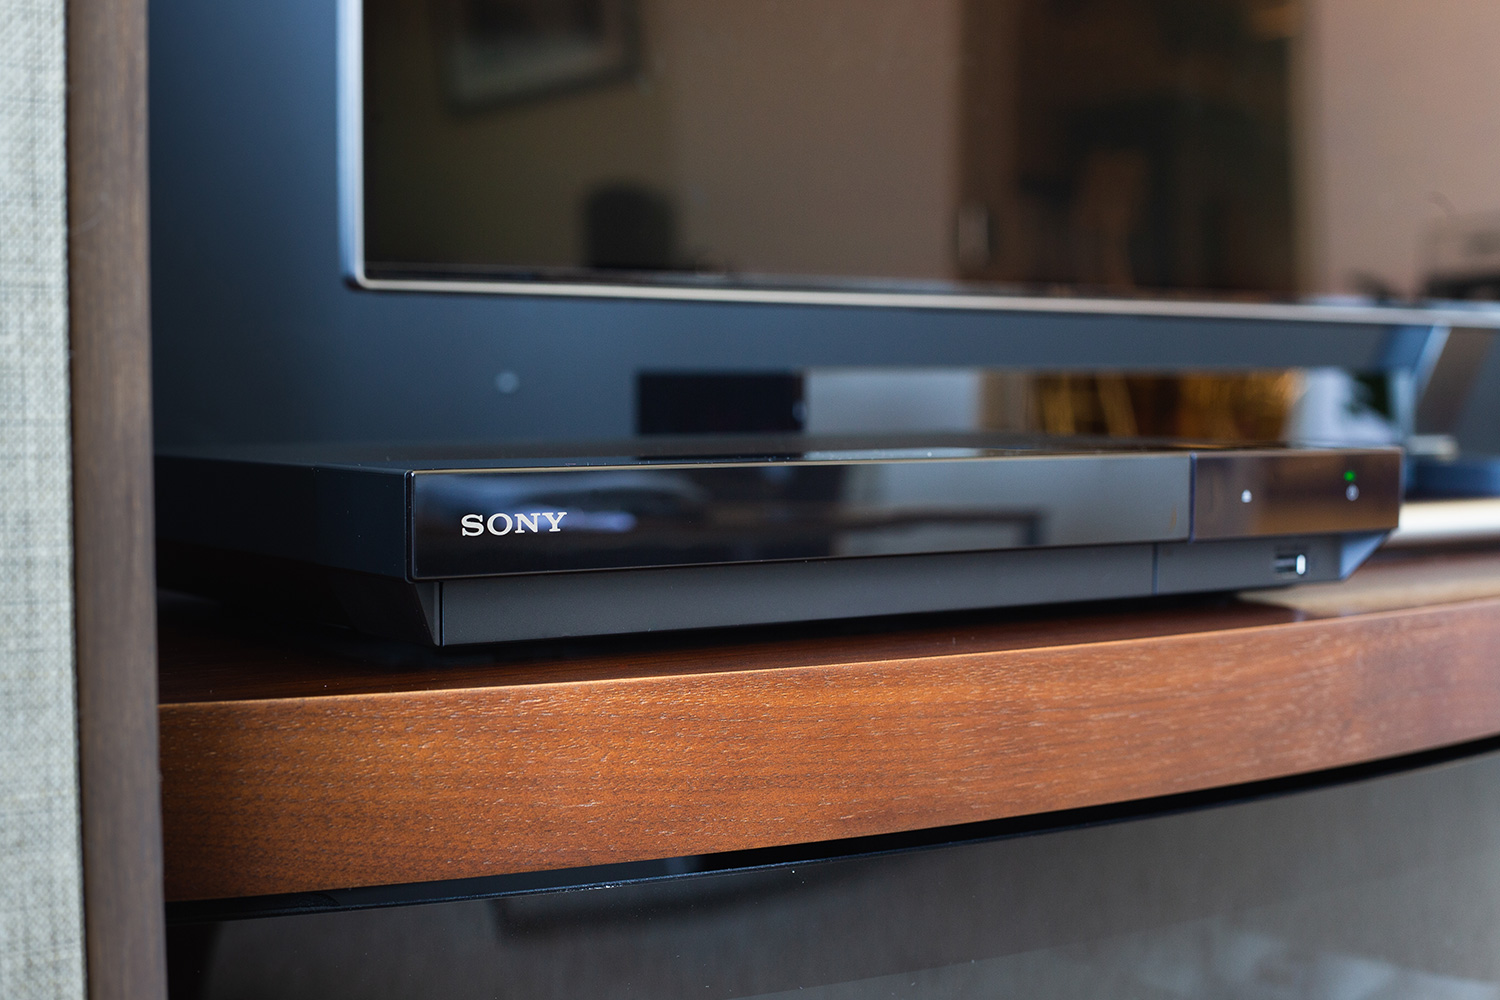 Sony UBP-X700 review: More 4K HDR Blu-ray goodness for less money